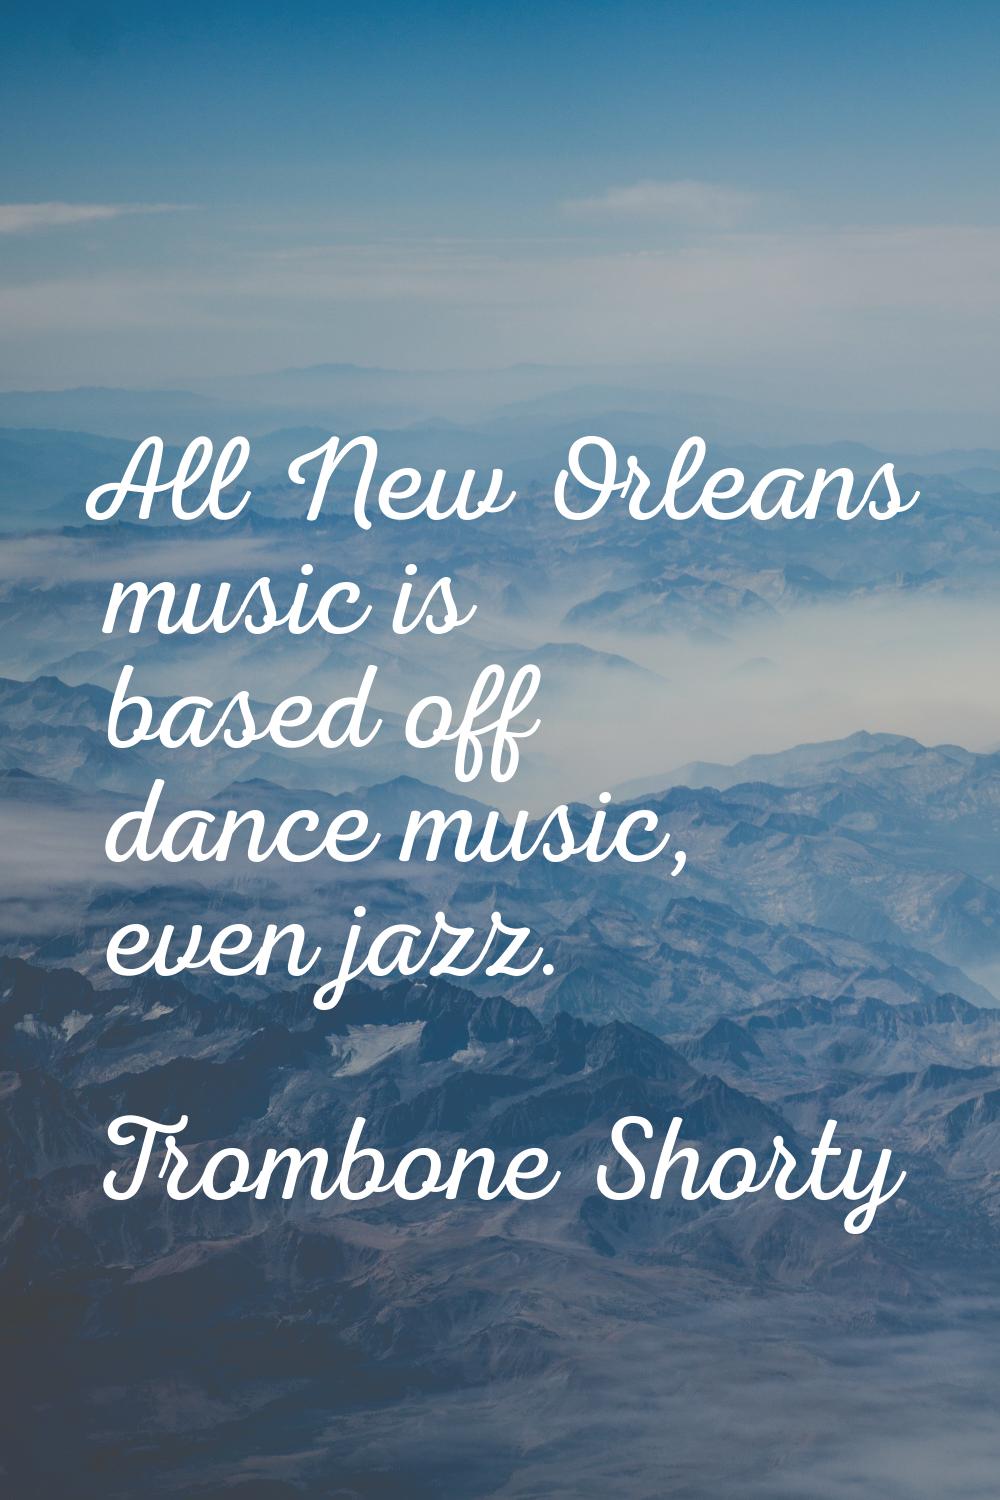 All New Orleans music is based off dance music, even jazz.